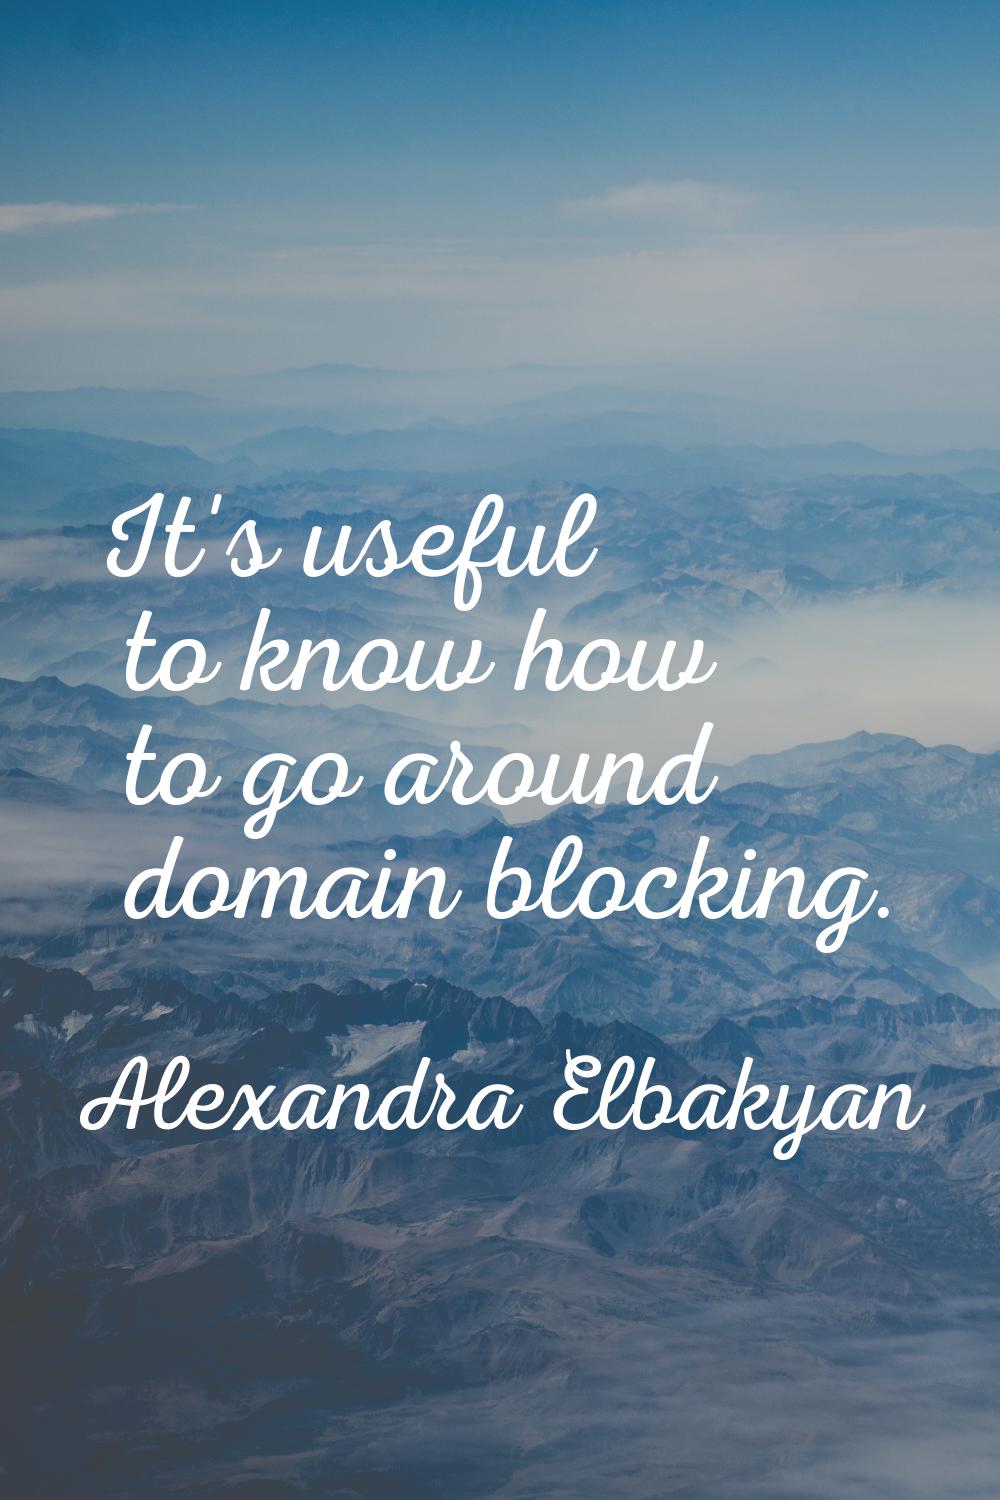 It's useful to know how to go around domain blocking.